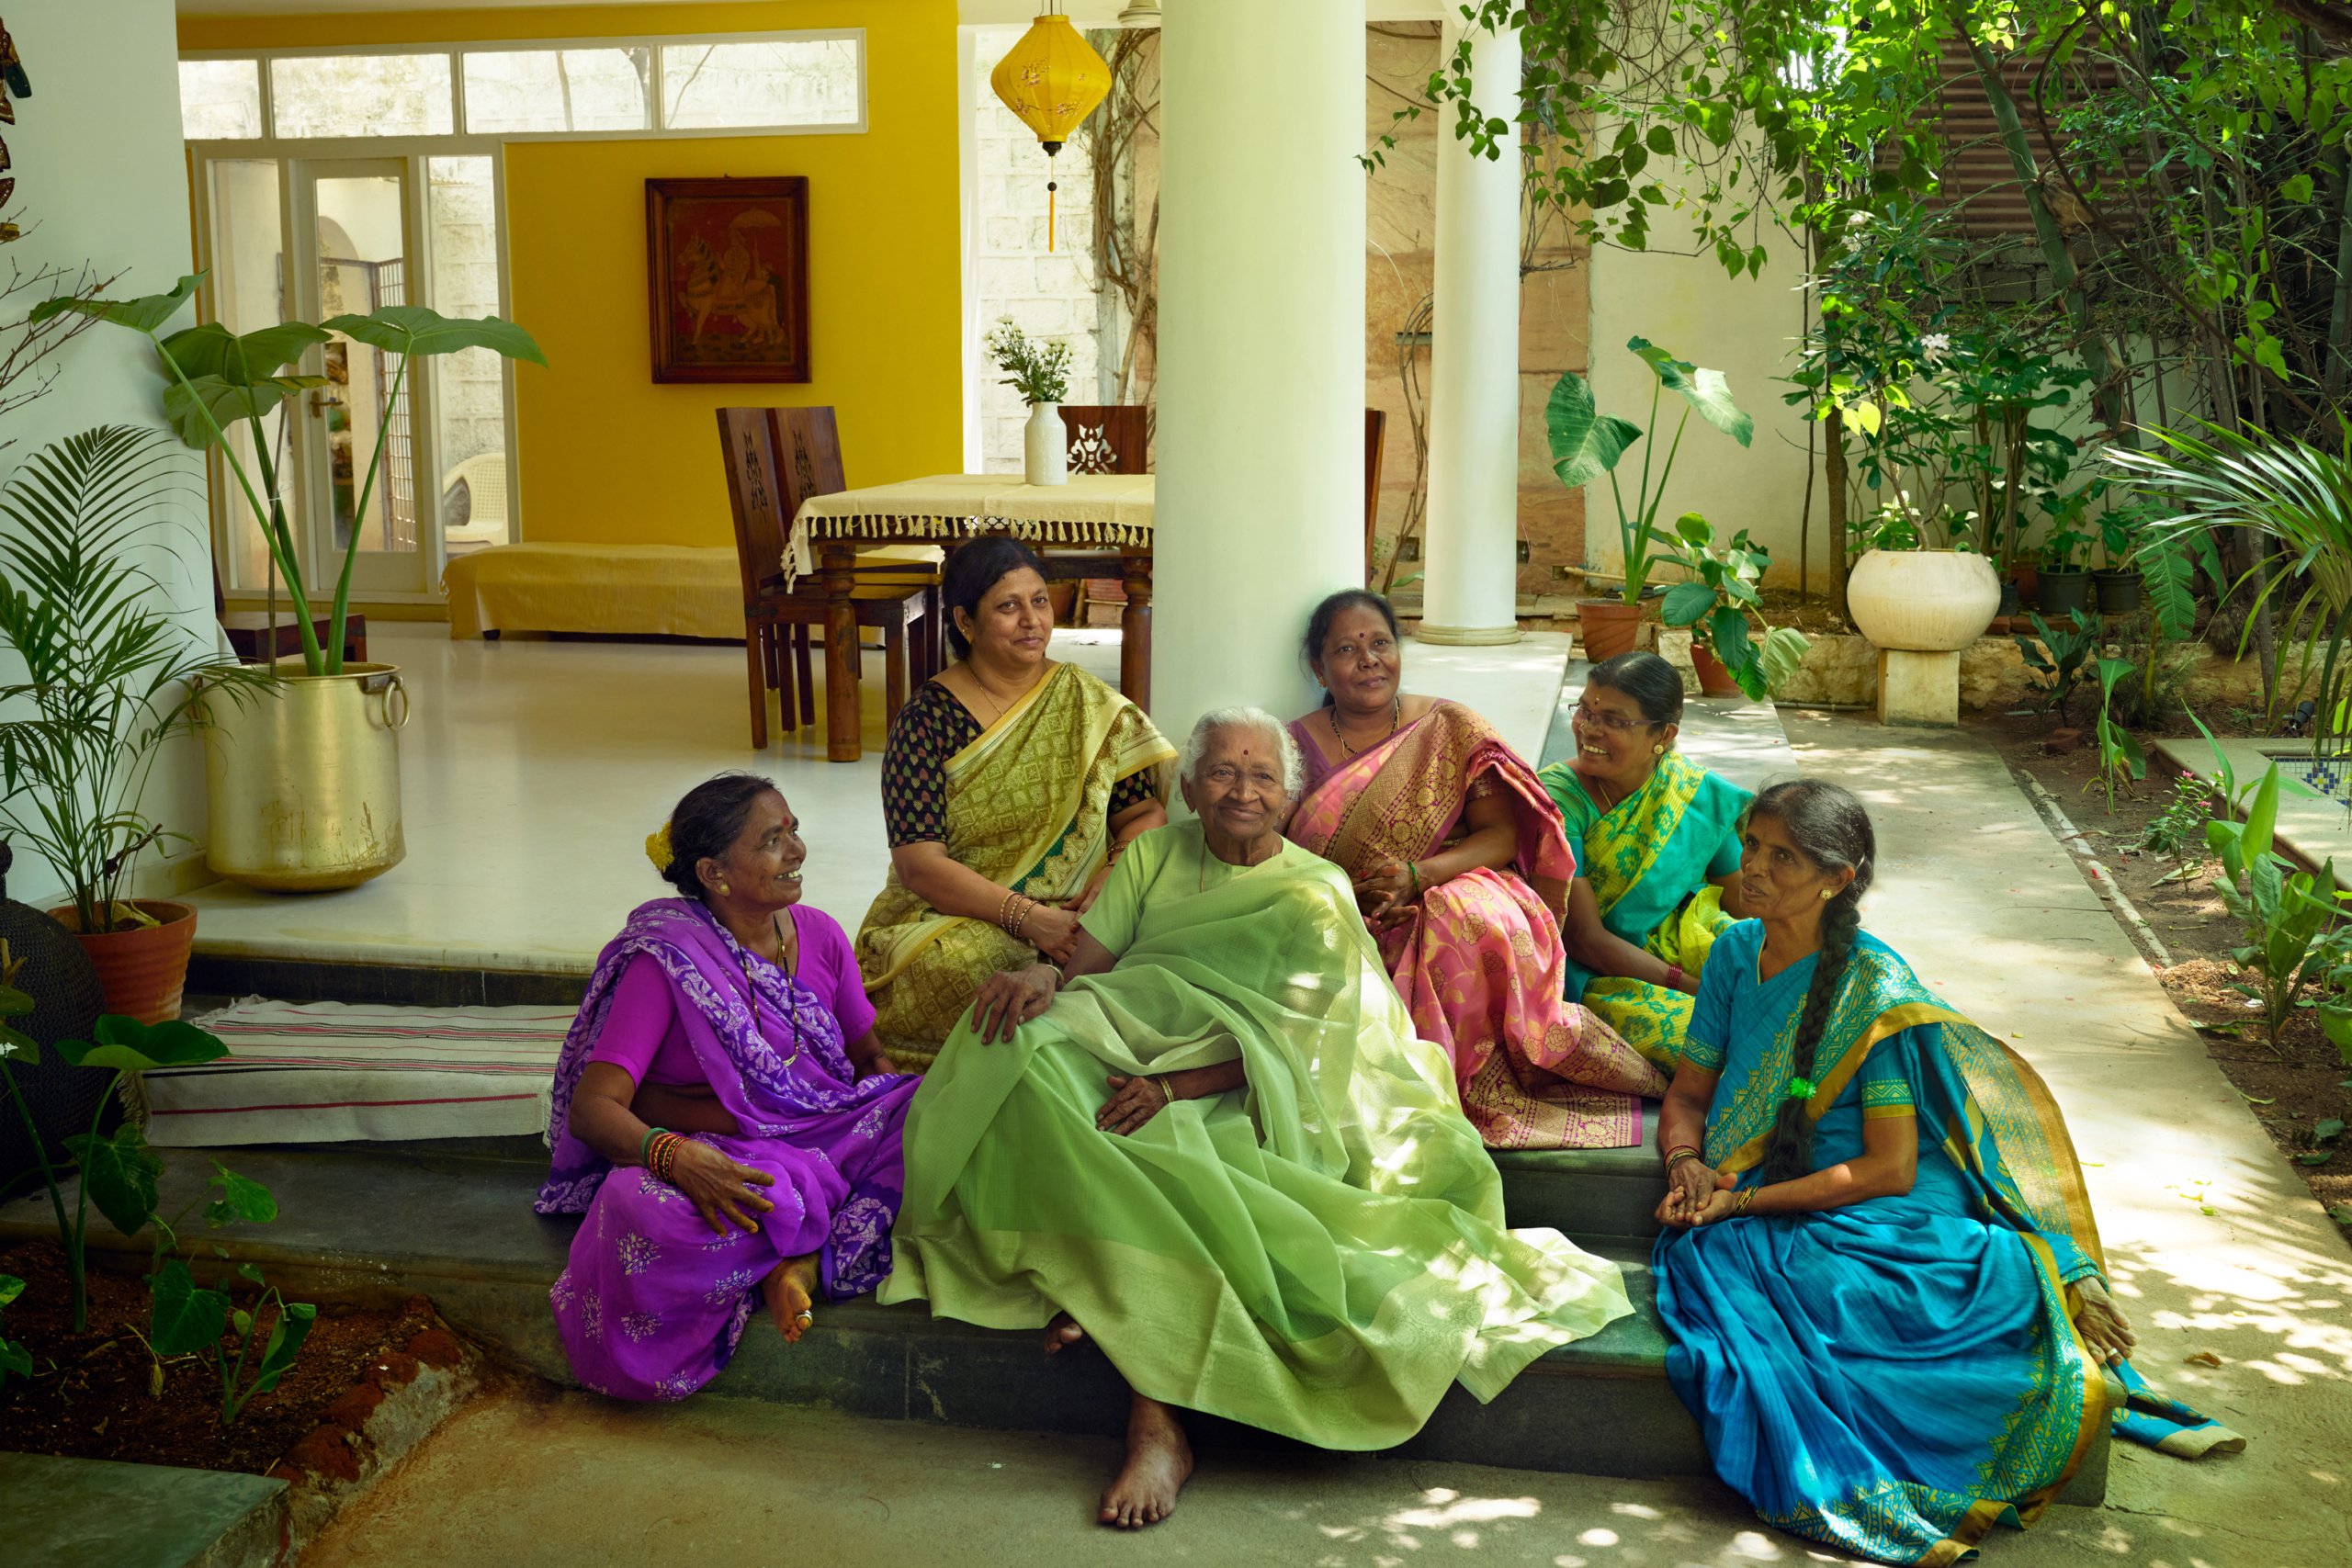 Revathi sitting on her patio surrounded by a group of friends smiling.